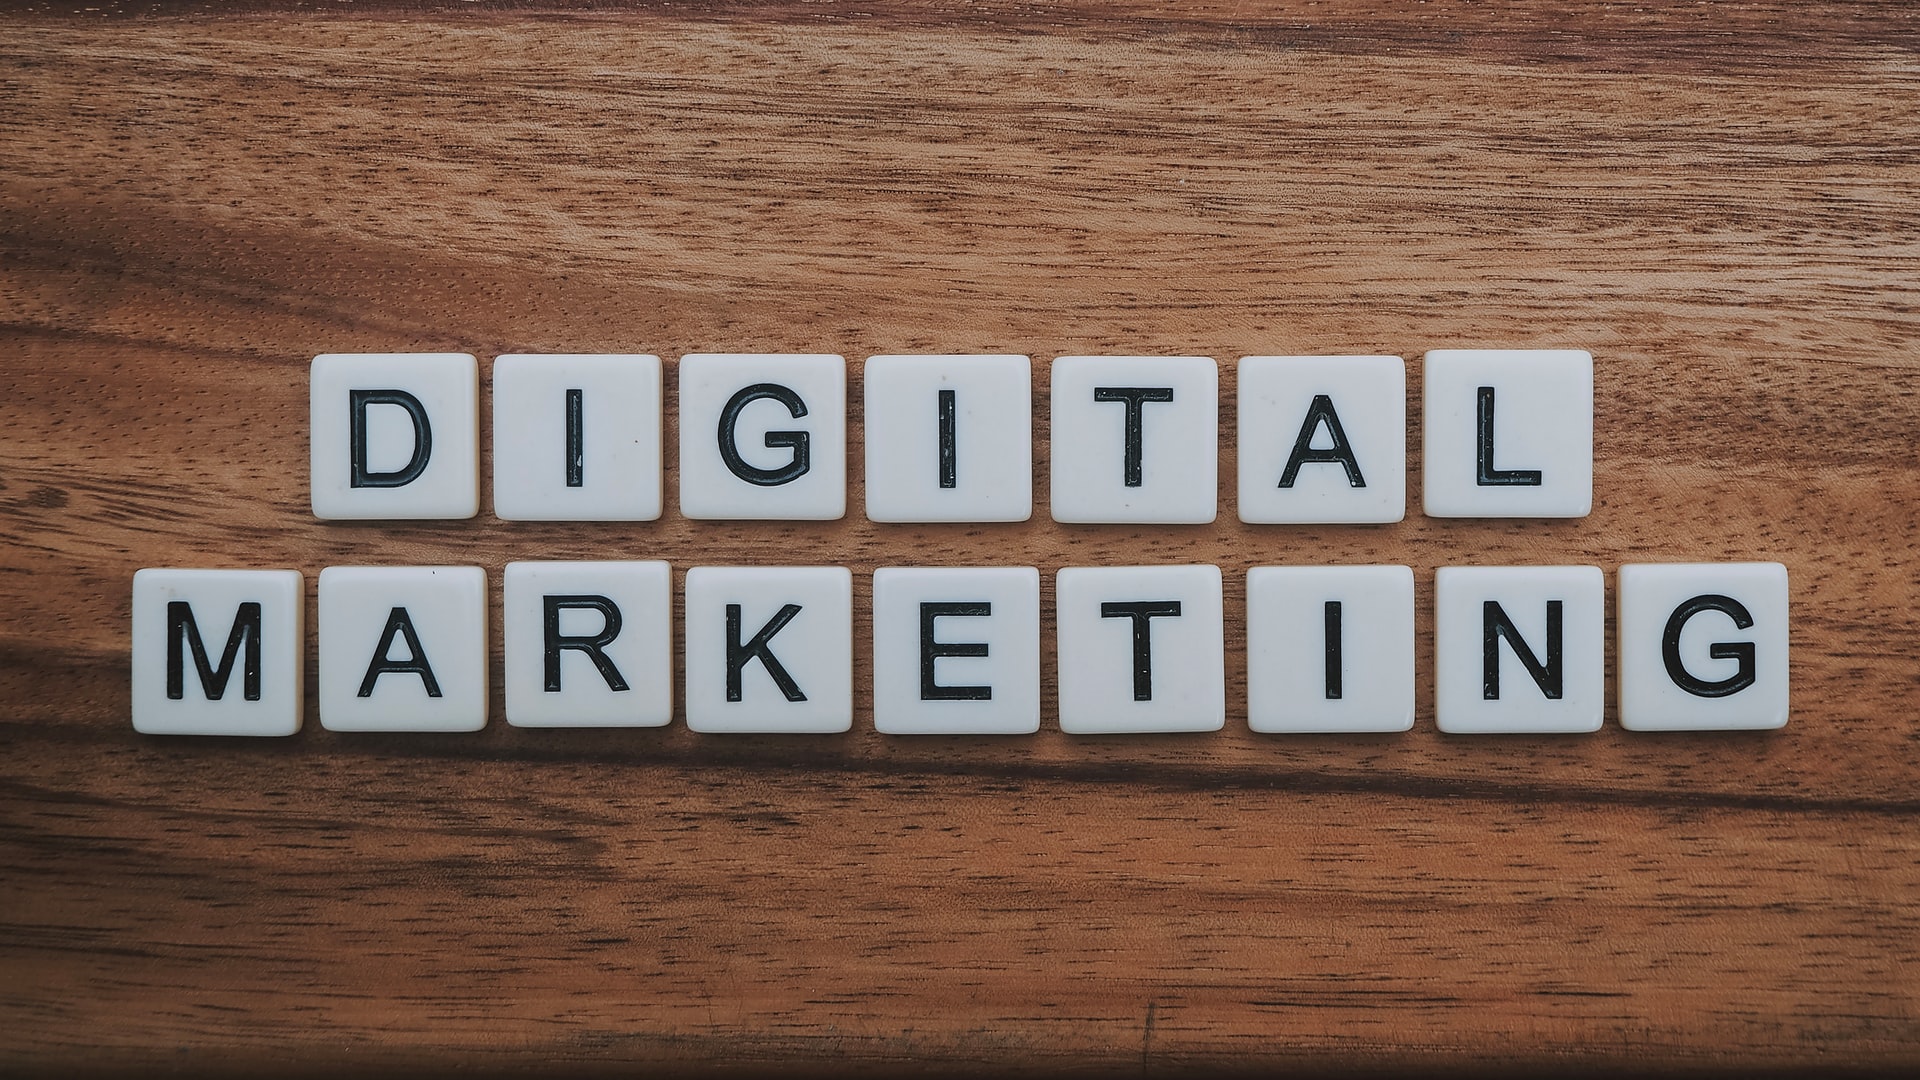 Kyle Lorber talks about the advantages of Digital Marketing